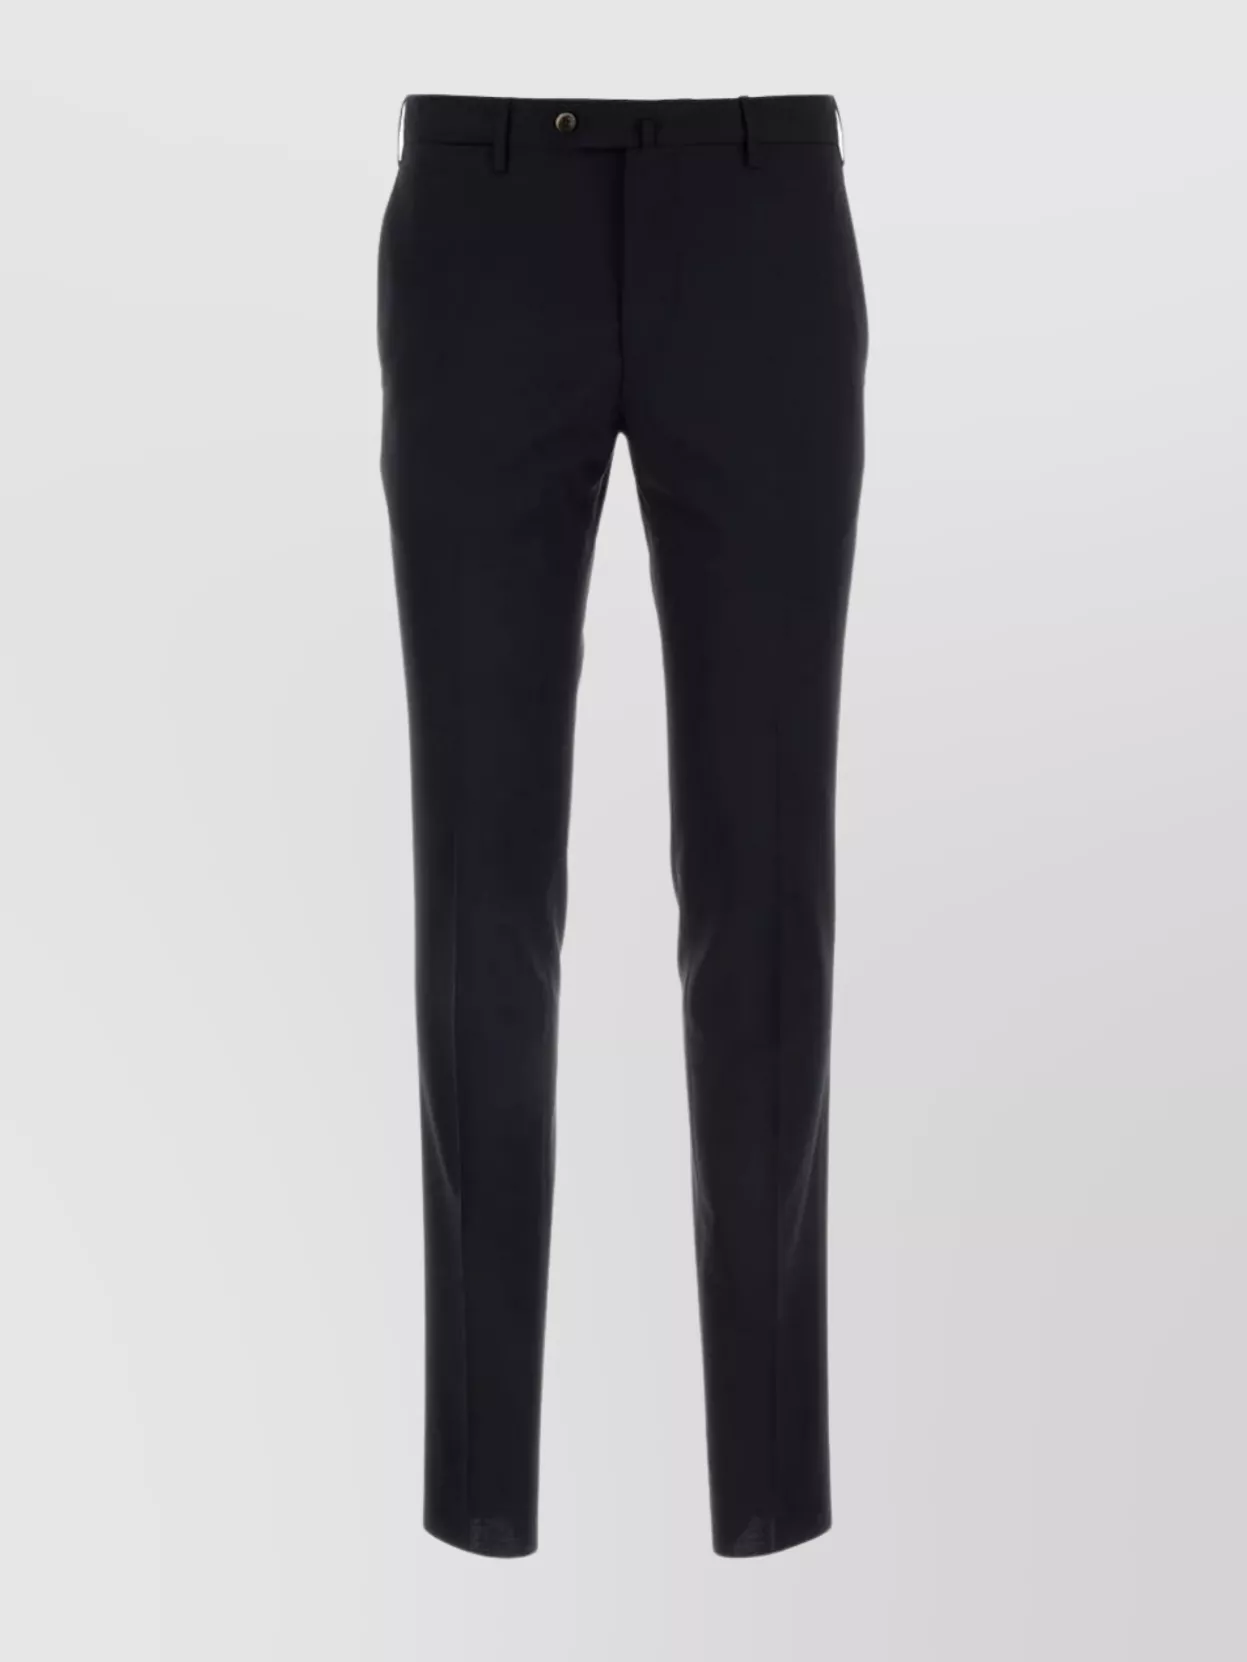 Shop Pt Torino Central Pleated Wool Pant